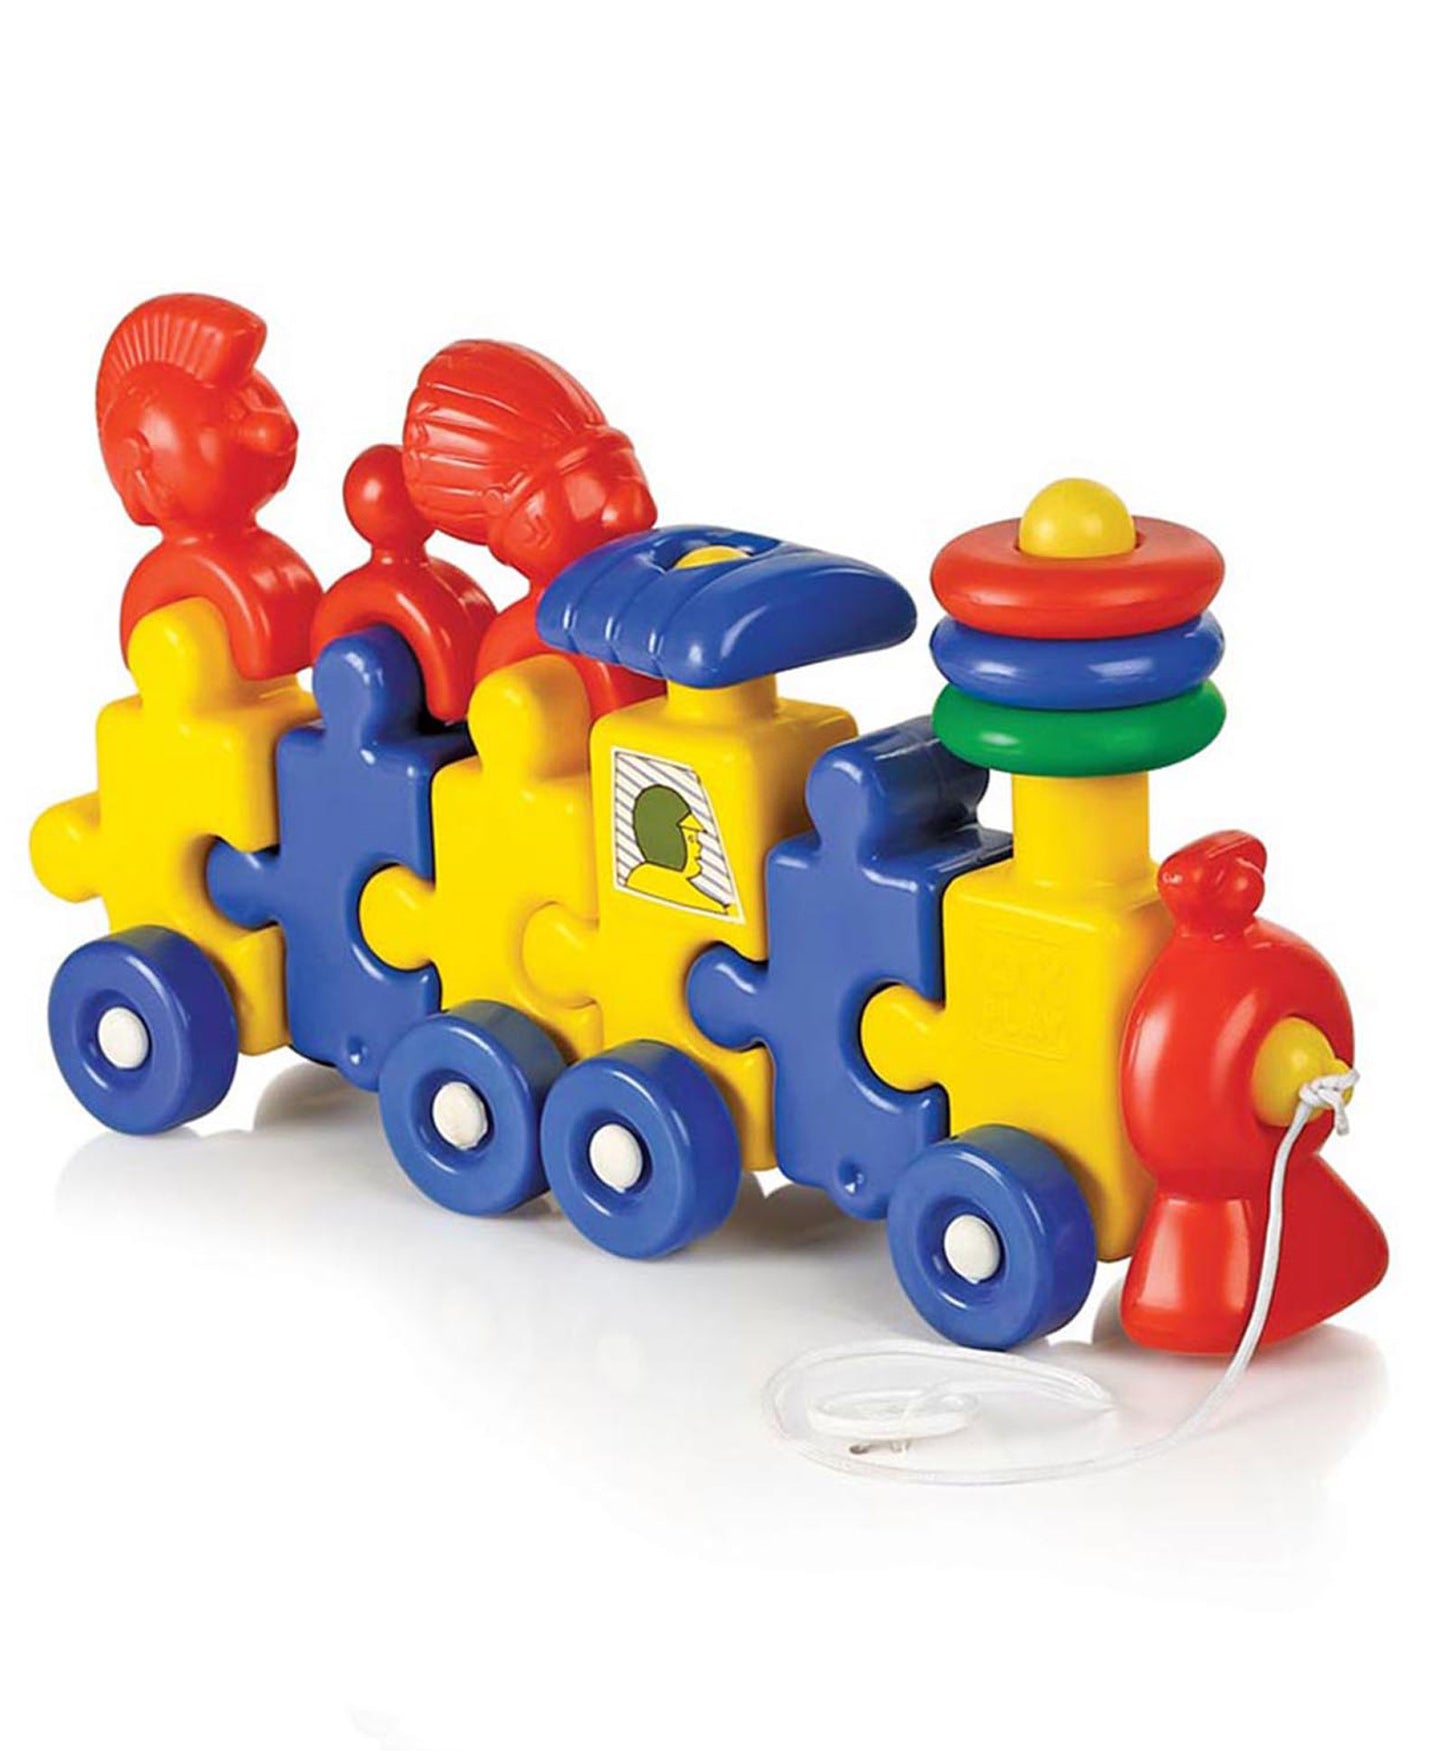 Train Block Building Toy for Kids